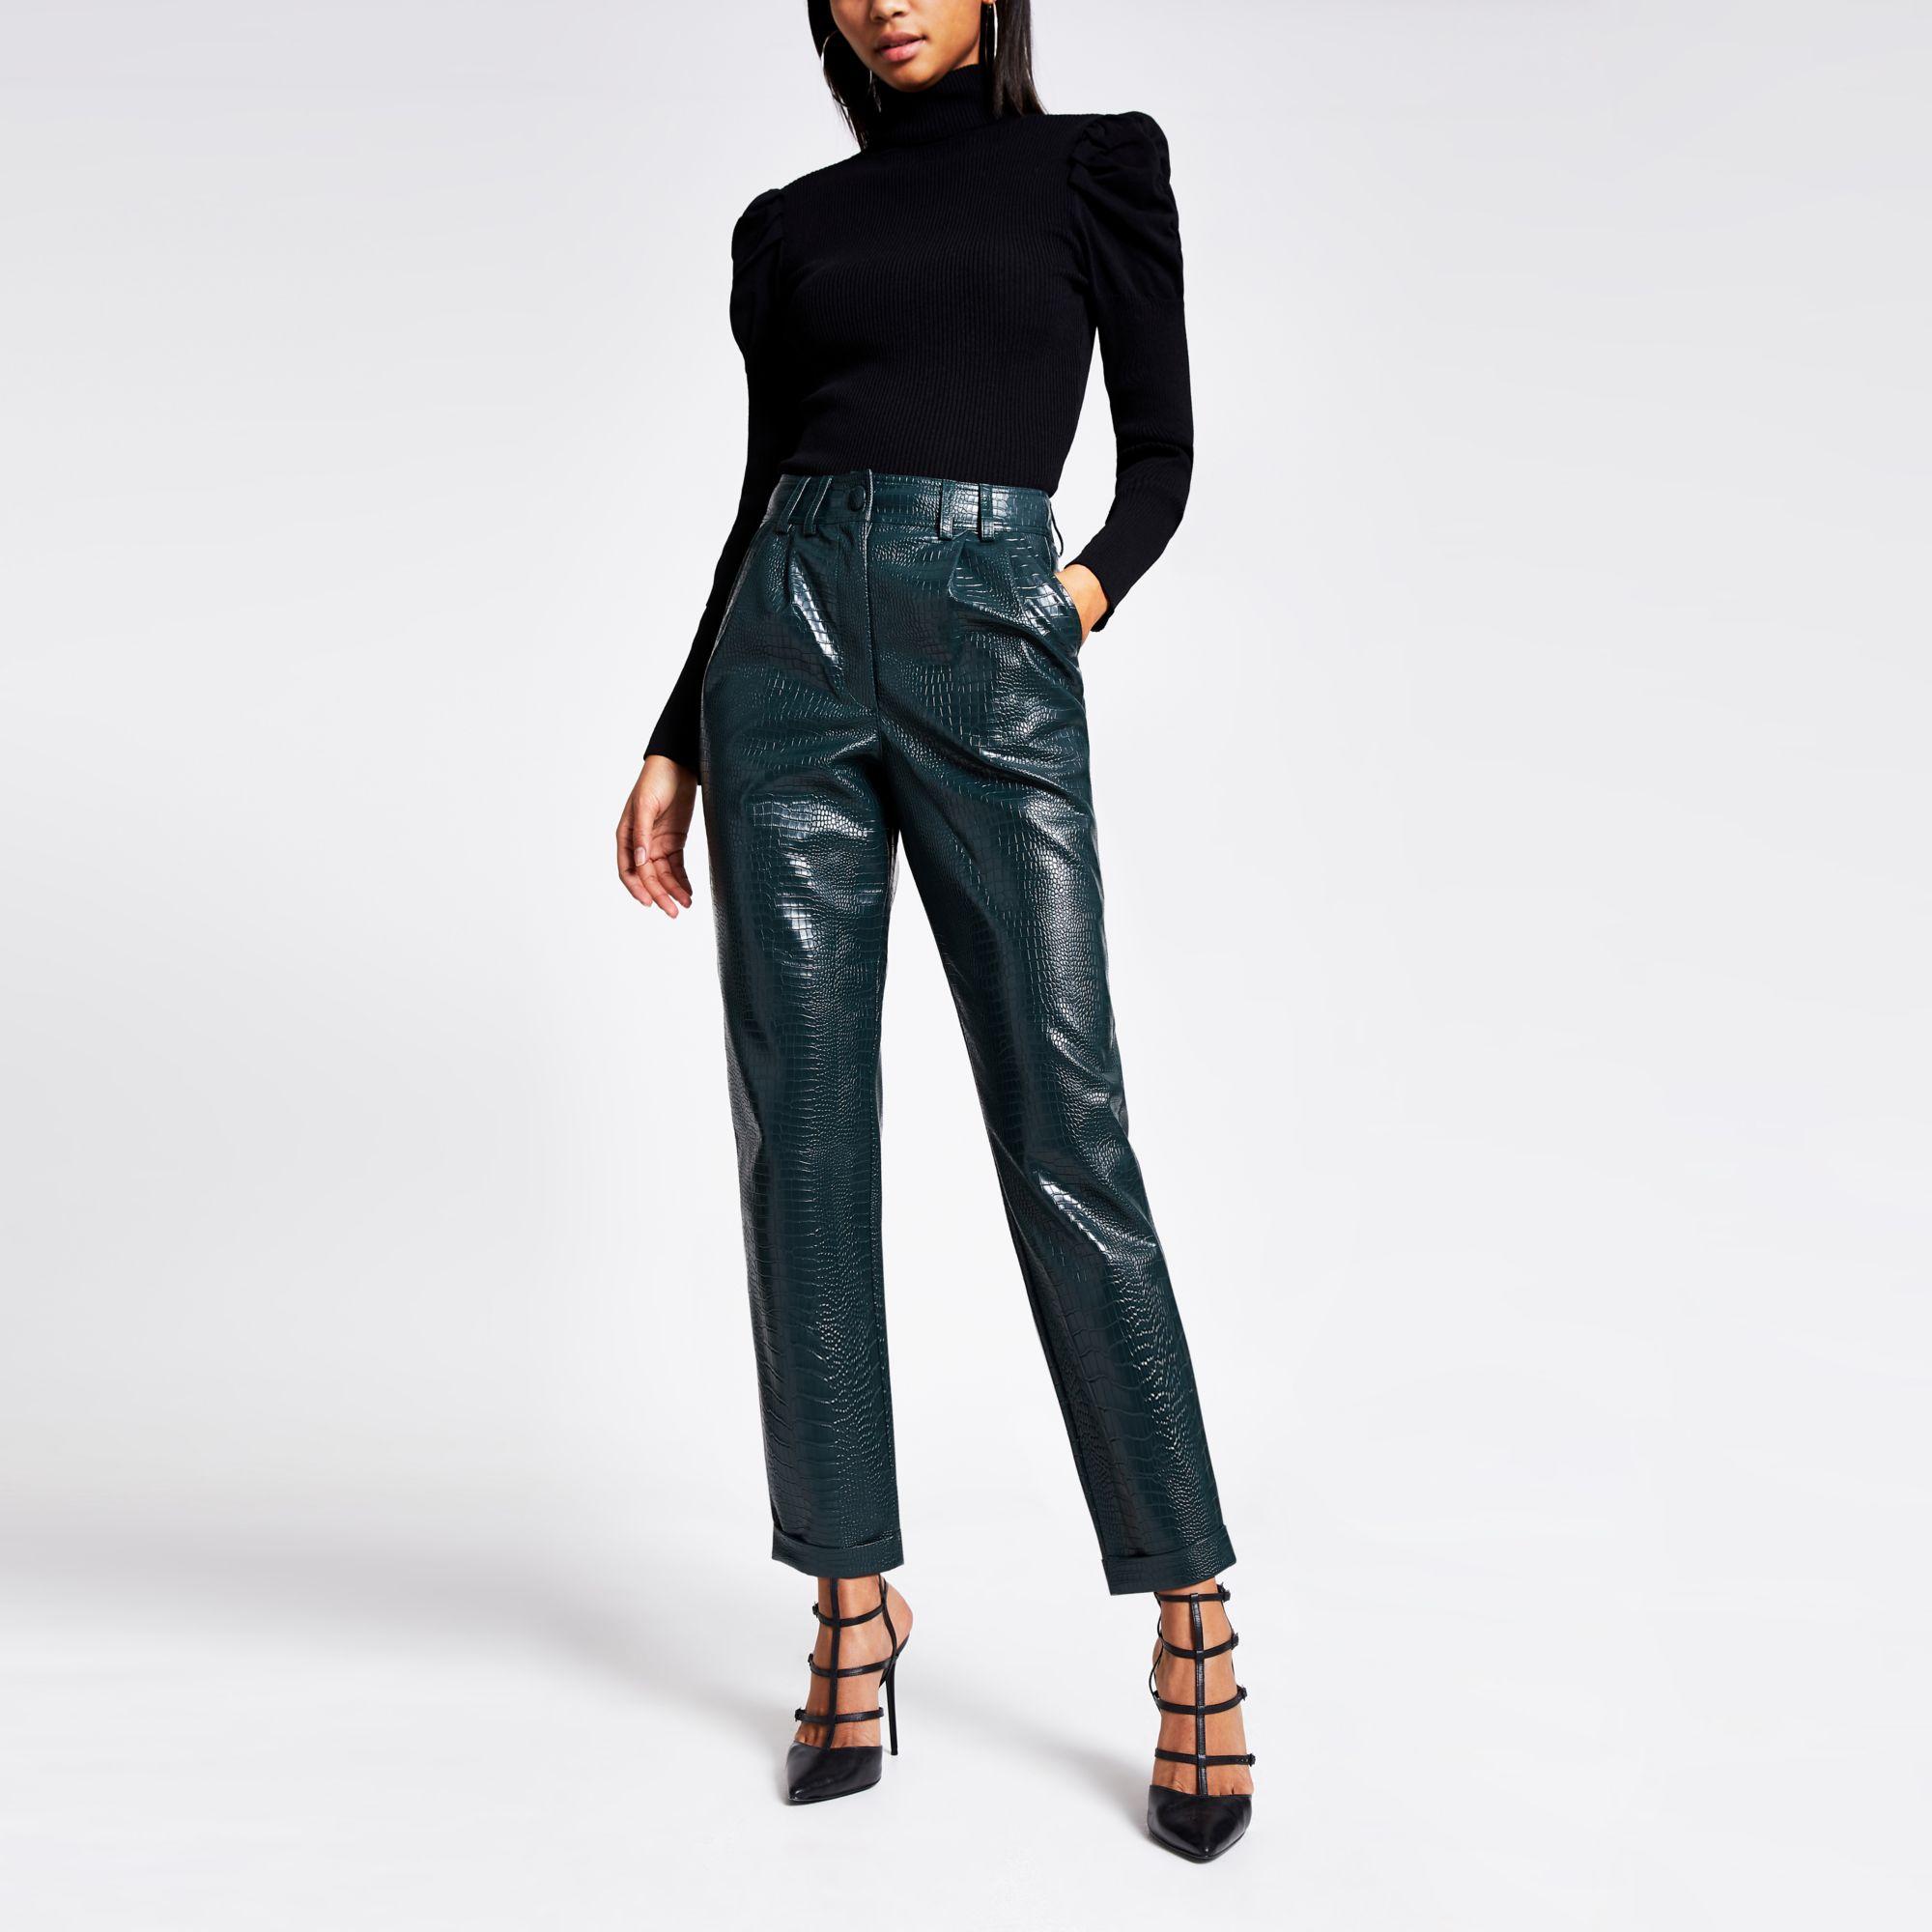 River Island Green Faux Leather Croc Embossed Trousers - Lyst